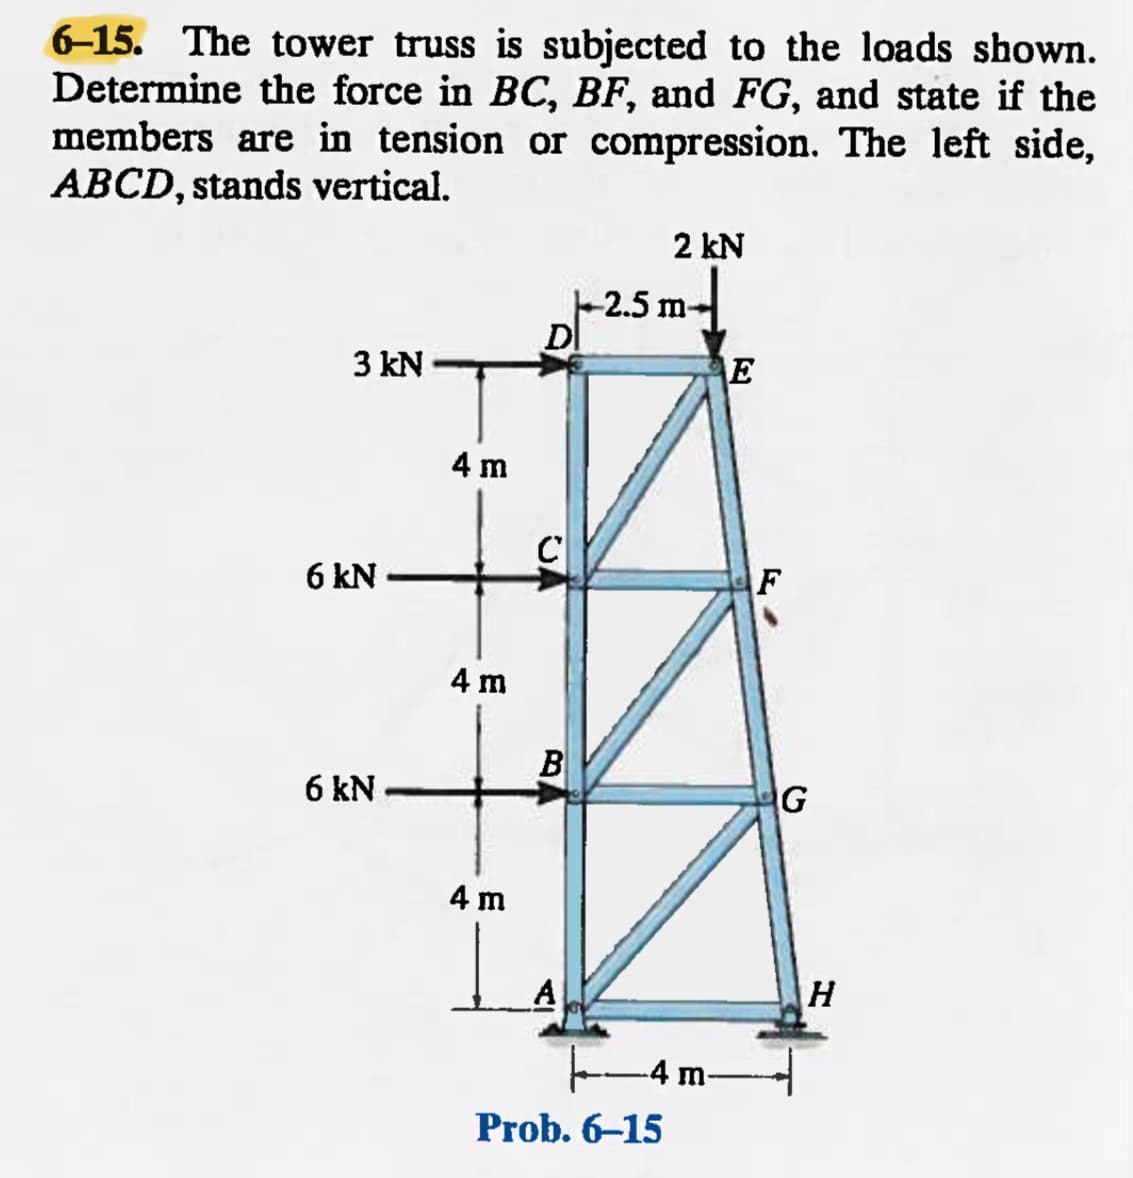 6-15. The tower truss is subjected to the loads shown.
Determine the force in BC, BF, and FG, and state if the
members are in tension or compression. The left side,
ABCD, stands vertical.
3 kN
6 kN
6 kN
4 m
4 m
4 m
D
C
BA
A
2 kN
-2.5 m-
-4 m-
Prob. 6-15
E
F
G
H